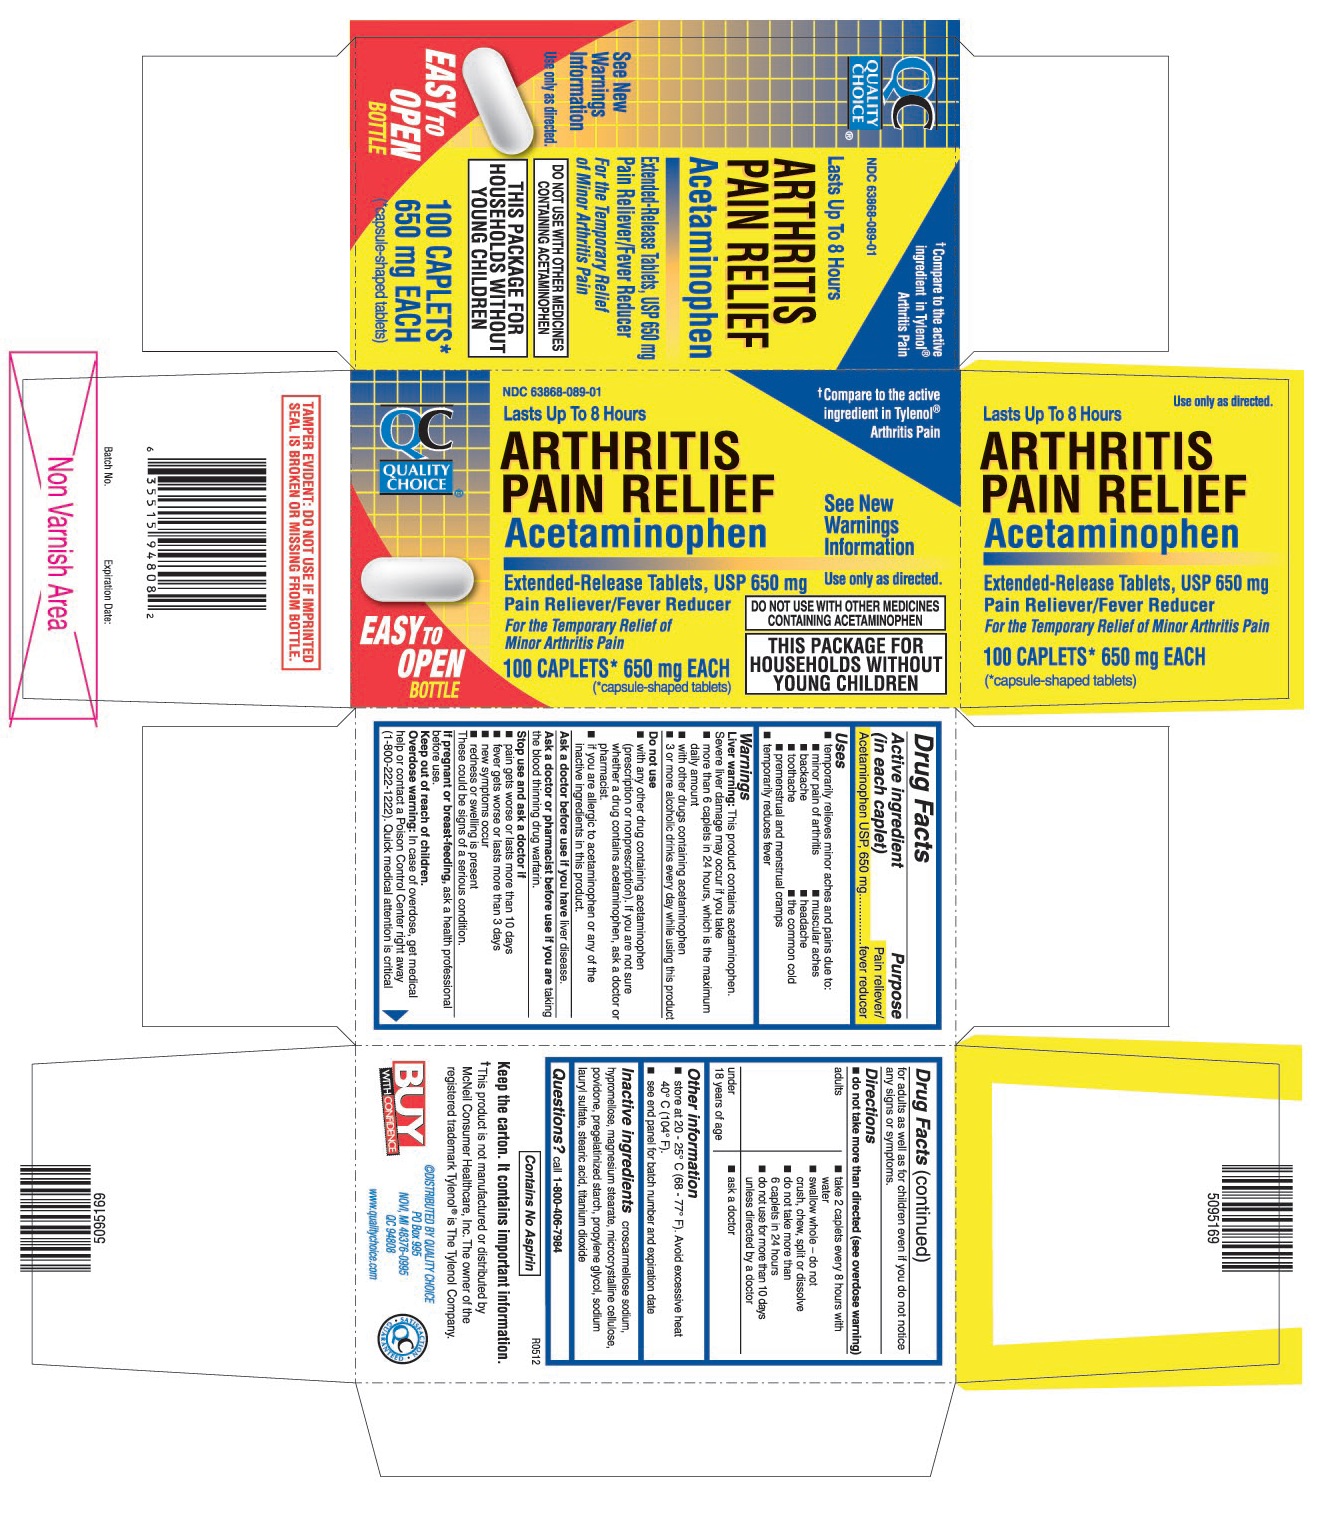 This is the 100 count bottle carton label for Quality Choice Acetaminophen extended-release tablets, USP 650 mg (APAP Arthritis).